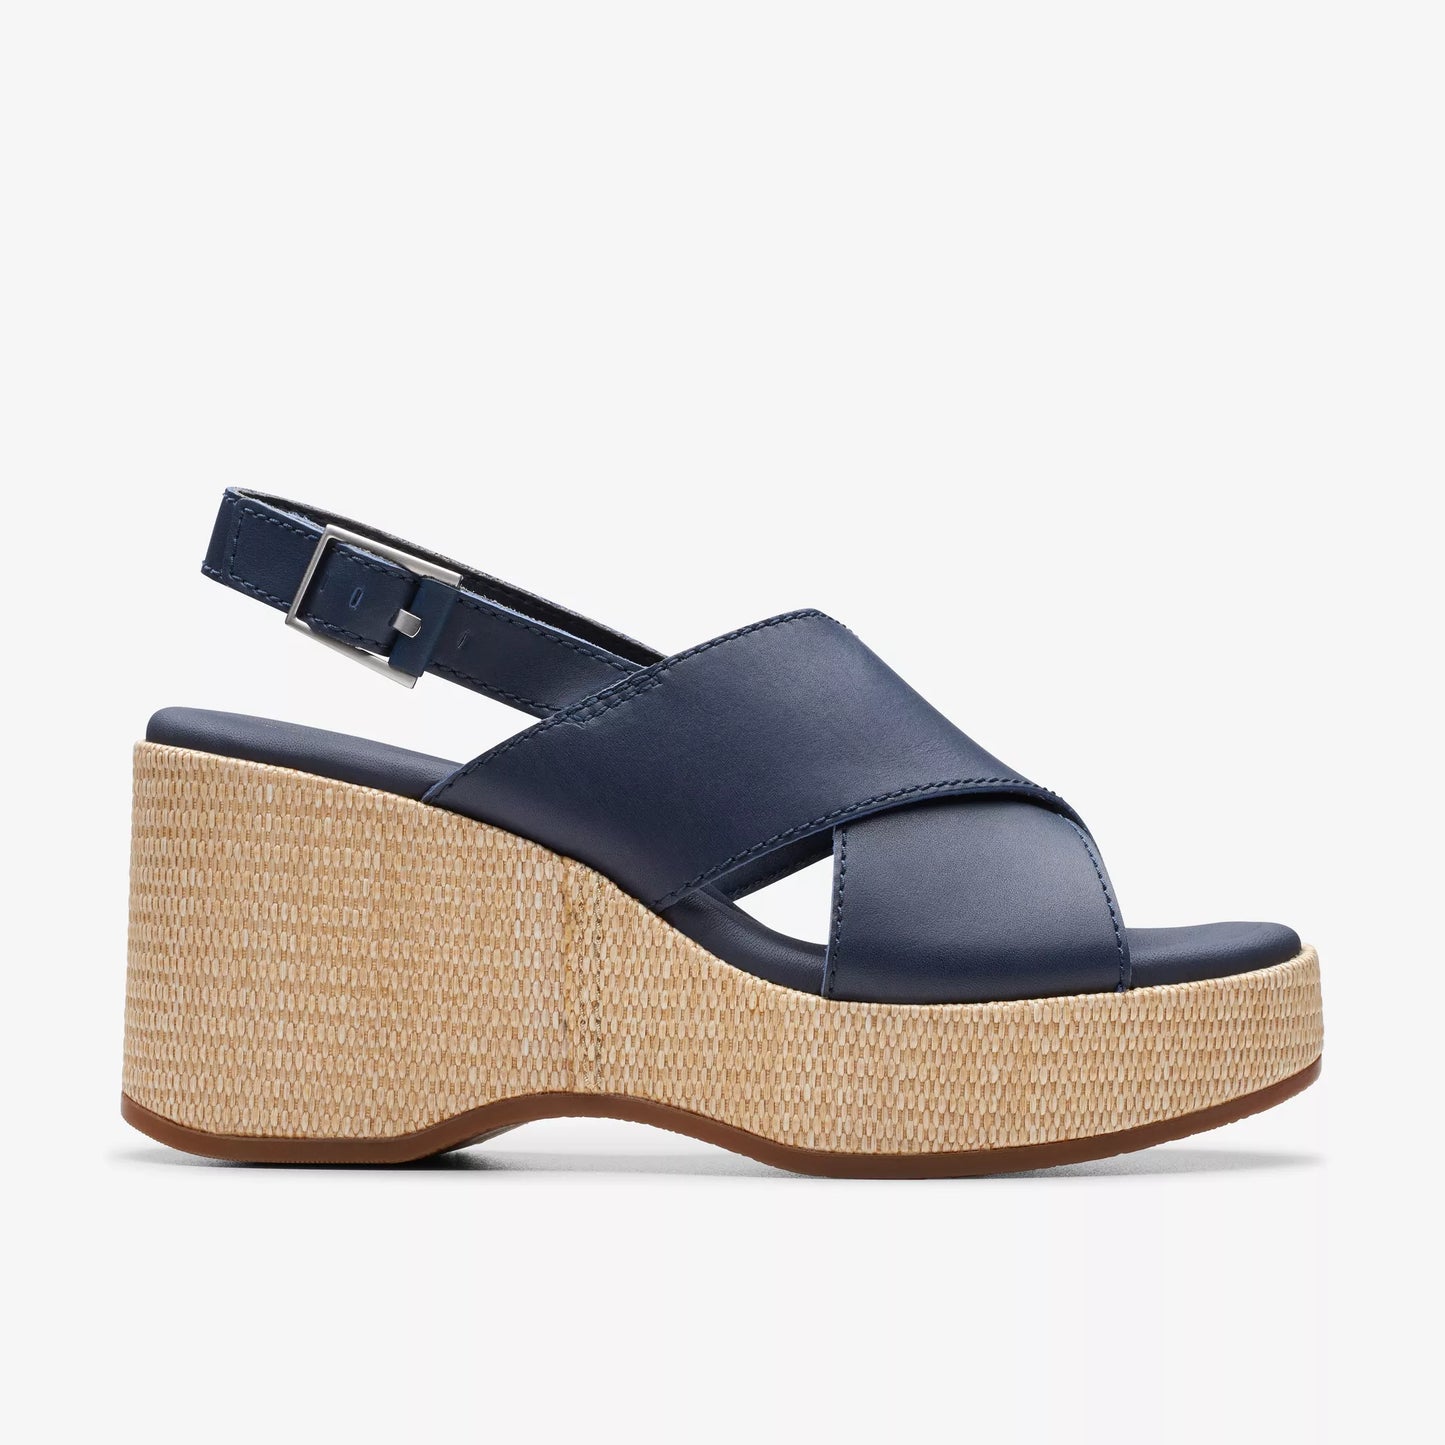 Profile view of the Clarks Manon Wish Sandal in Navy Leather